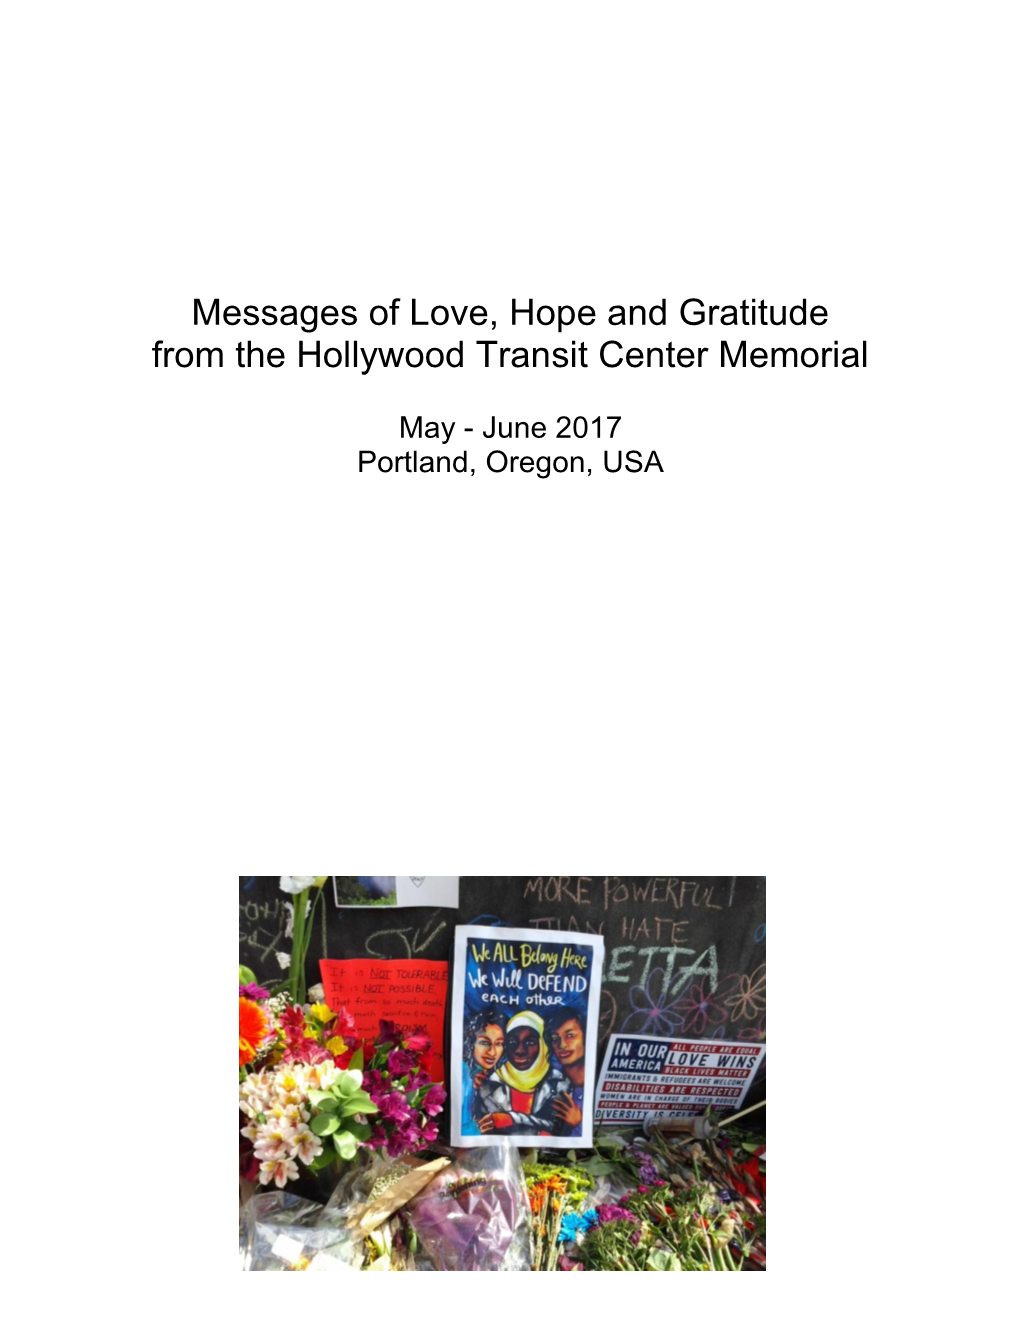 Messages of Love, Hope and Gratitude from the Hollywood Transit Center Memorial